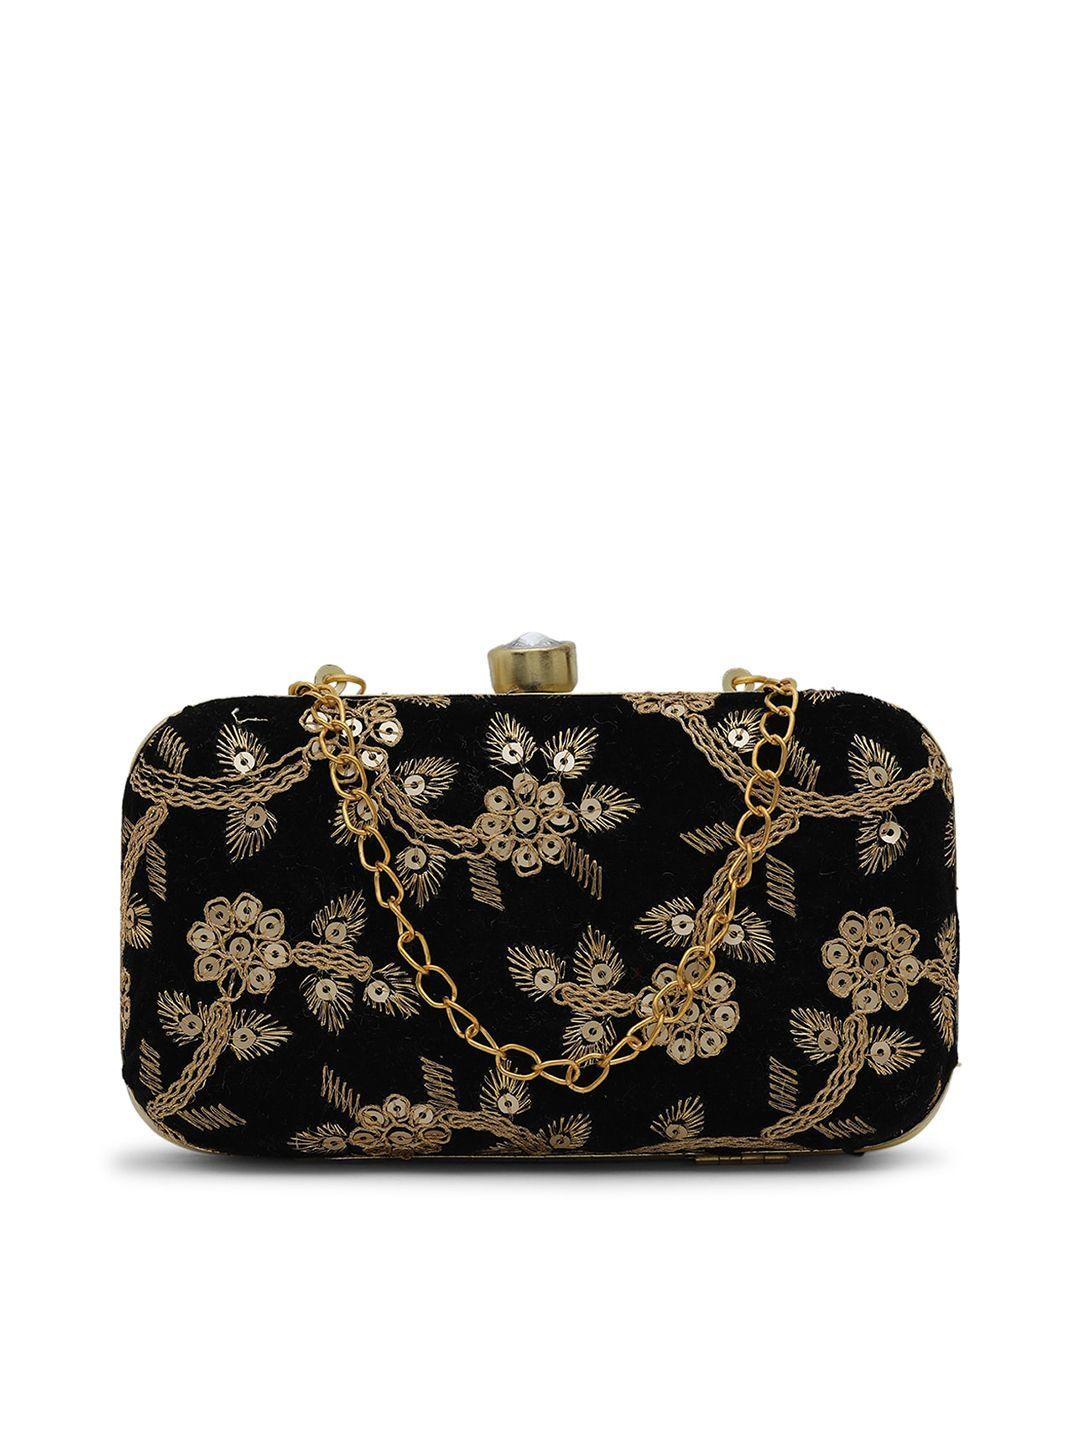 gaura pakhi black & gold-toned embroidered purse clutch